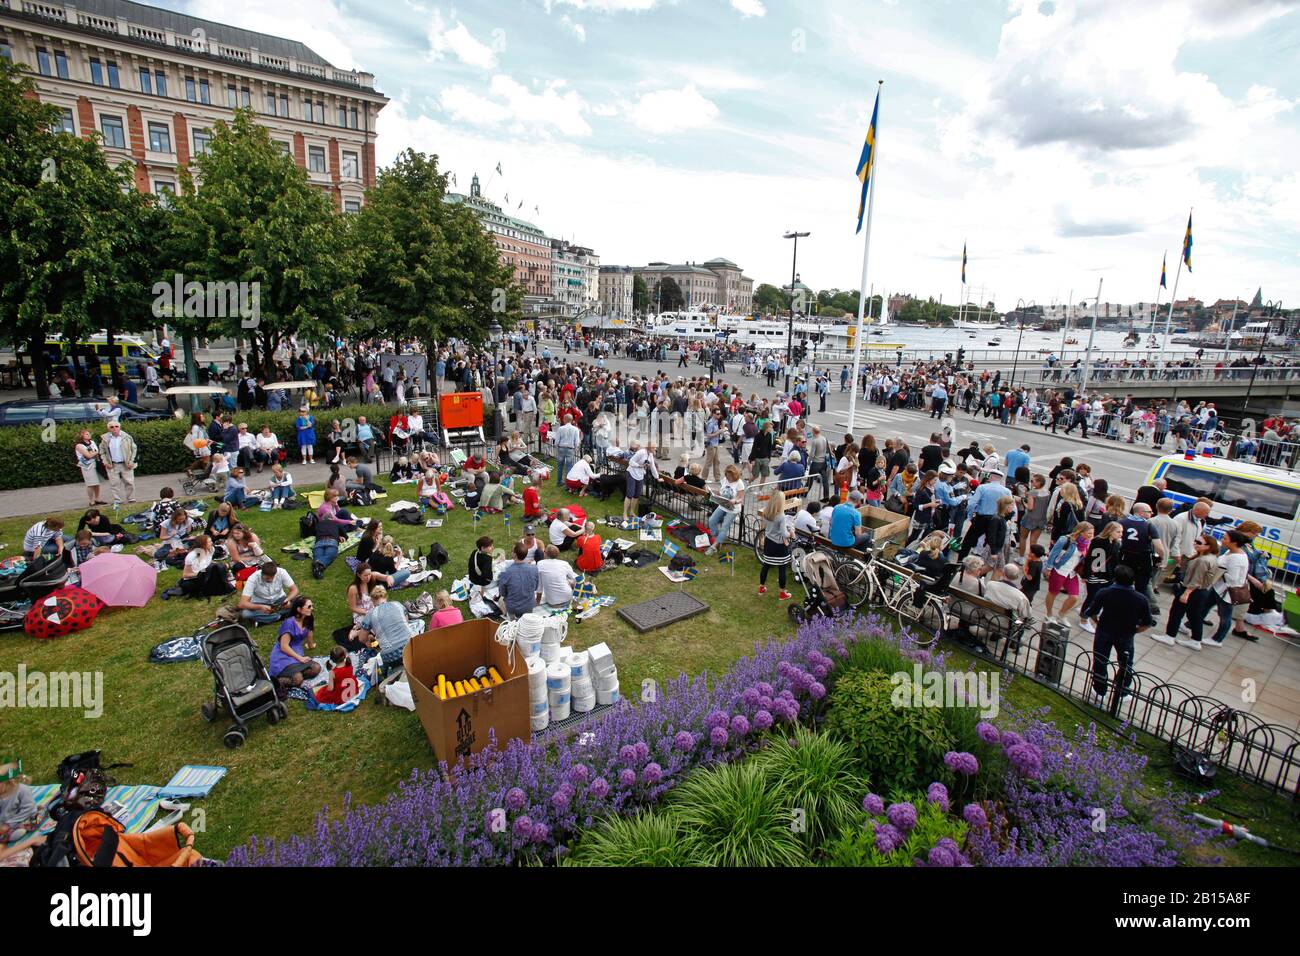 People at Karl XII's square in Stockholm city during the wedding between Crown Princess Victoria and Prince Daniel. The wedding of Victoria, Crown Princess of Sweden, and Daniel Westling took place on 19 June 2010 in Stockholm Cathedral.Stockholm 2010-06-19 Photo Jeppe Gustafsson Stock Photo